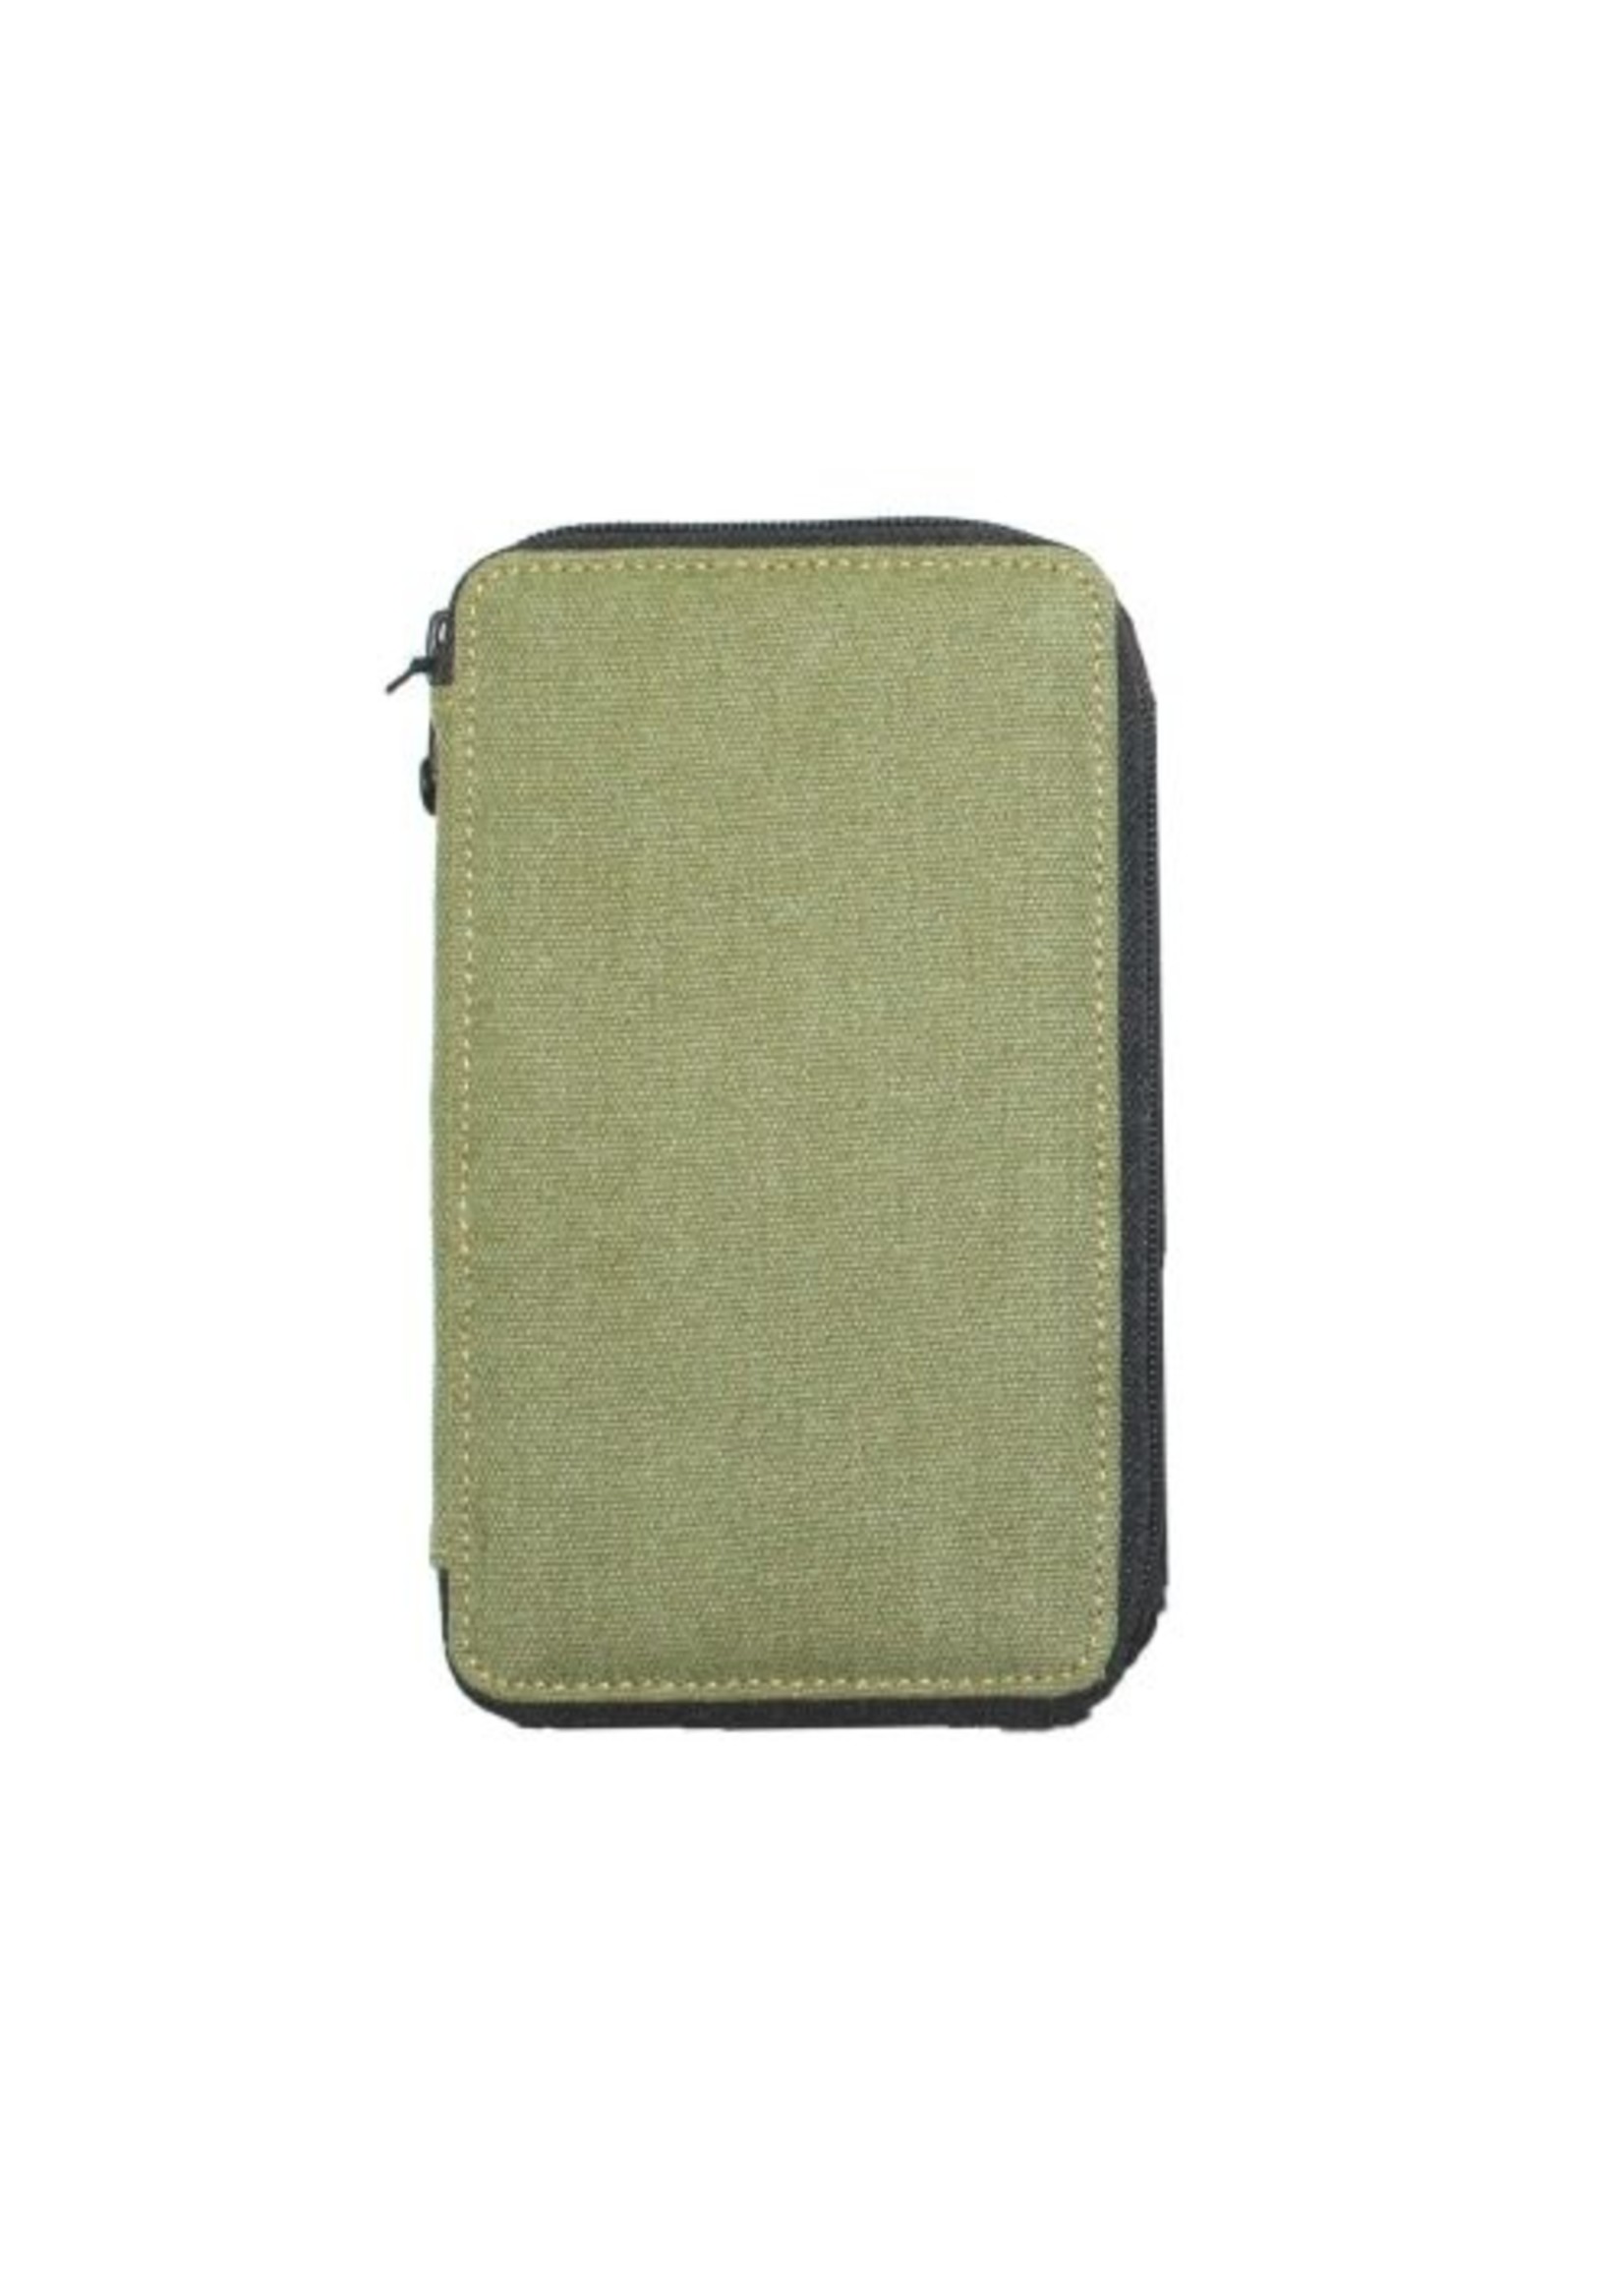 GLOBAL PRODUCTS CANVAS PENCIL CASE OLIVE 48 CT